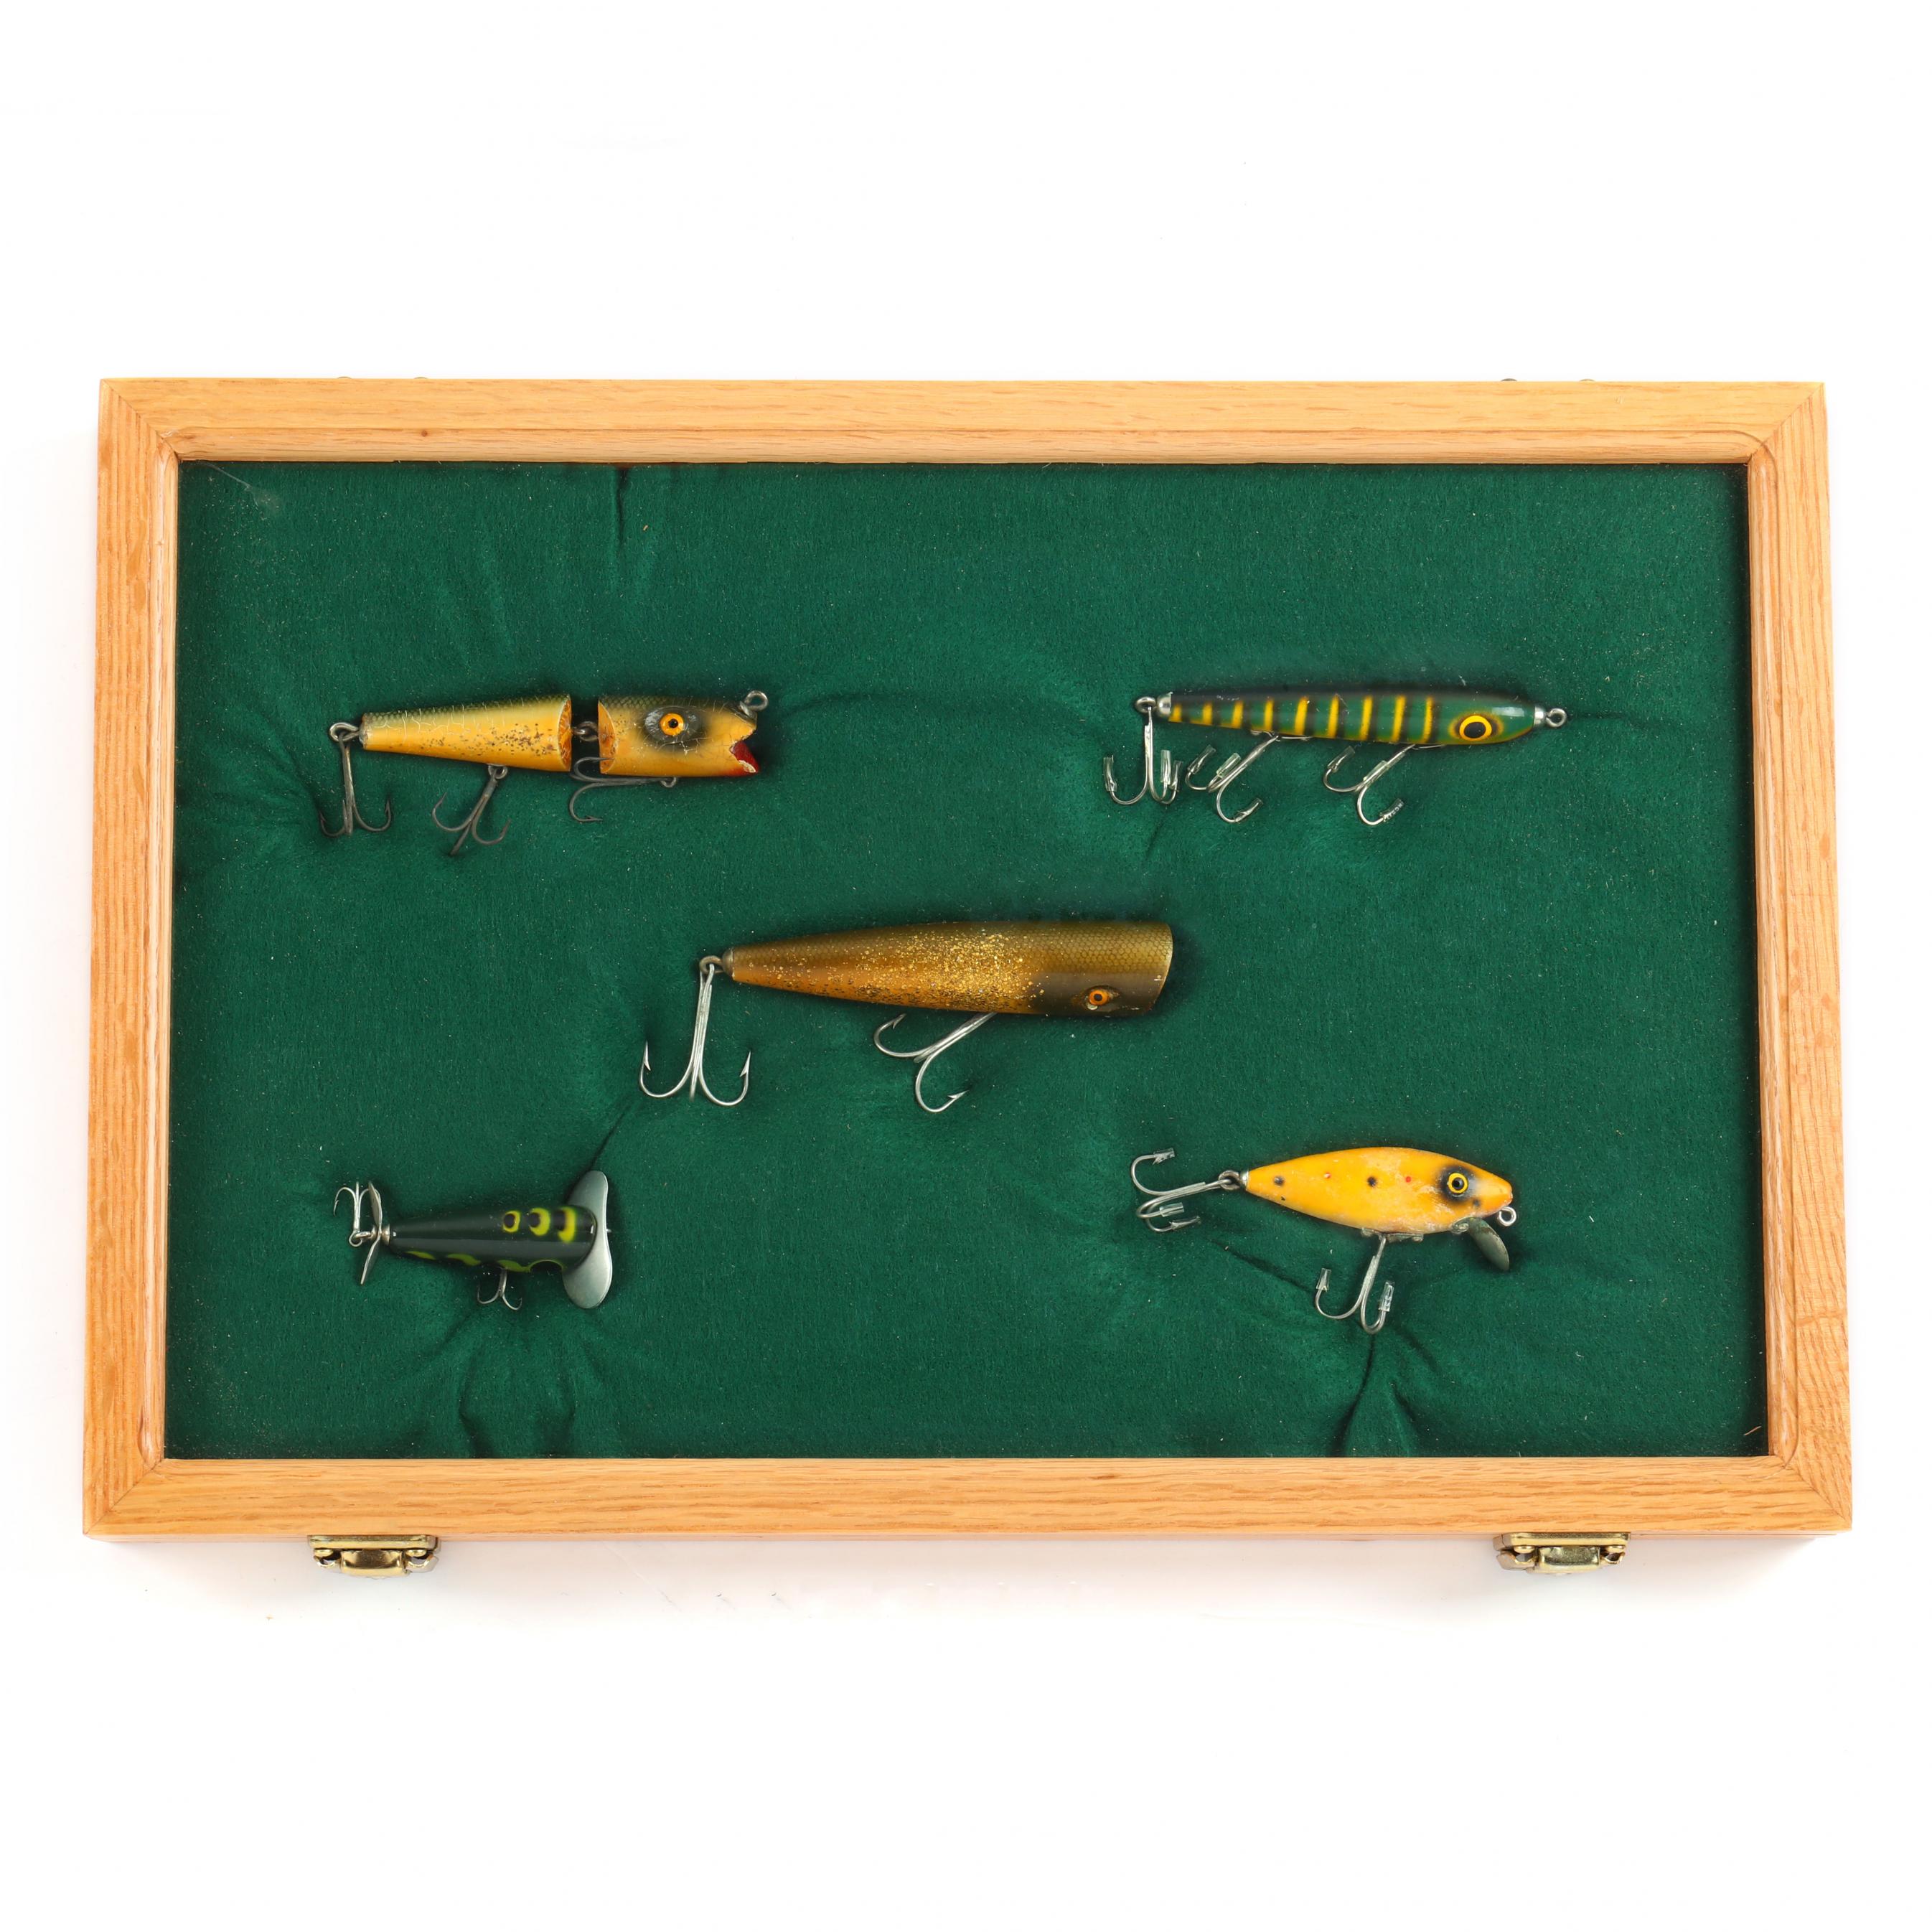 Display frames/boxes for 'antique' lures?